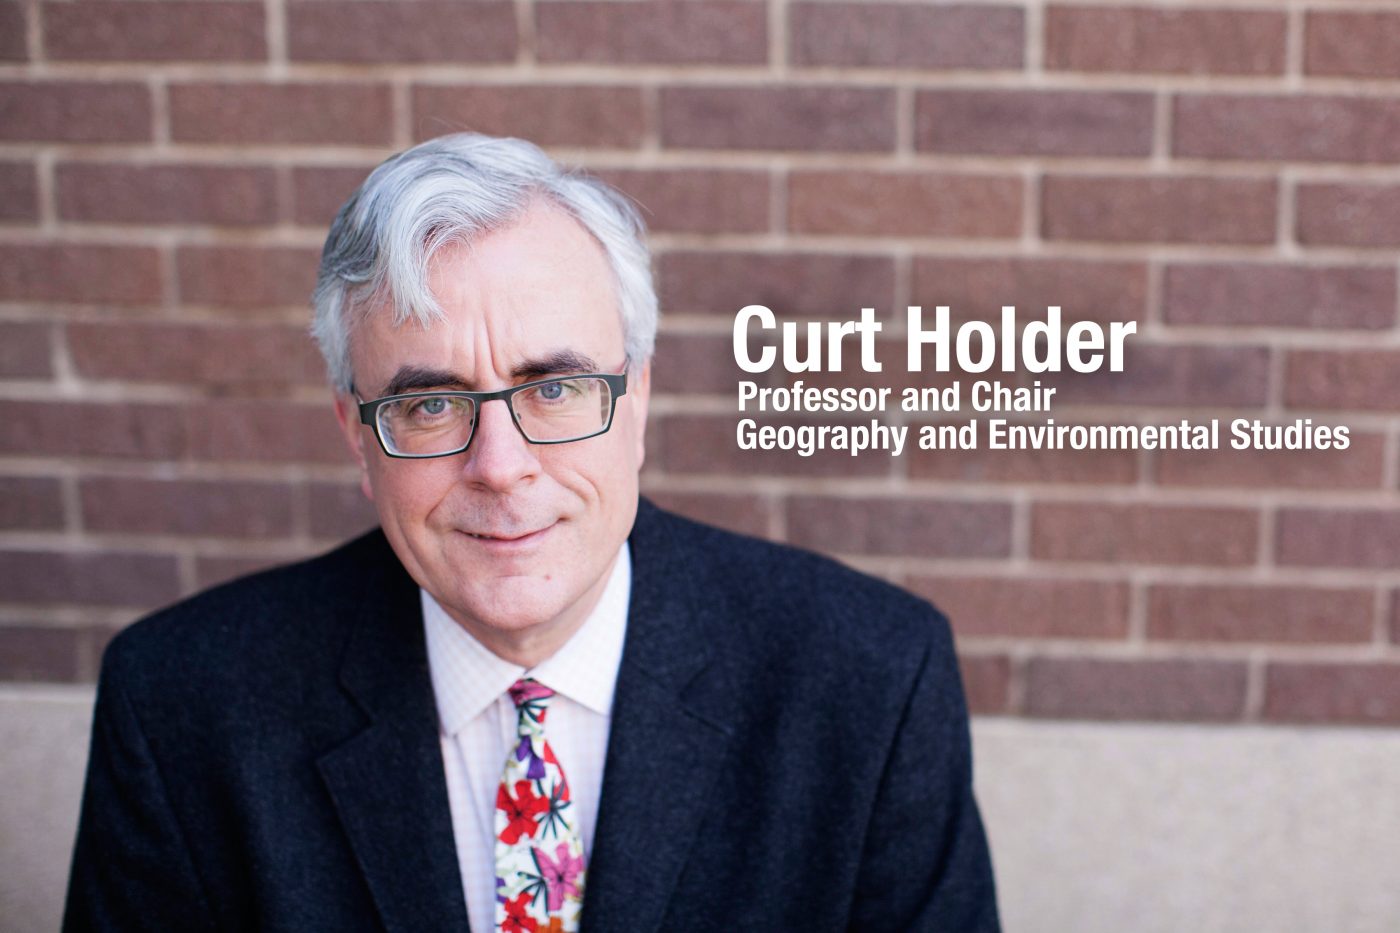 Curt Holder, Professor and Chair, Geography and Environmental Studies